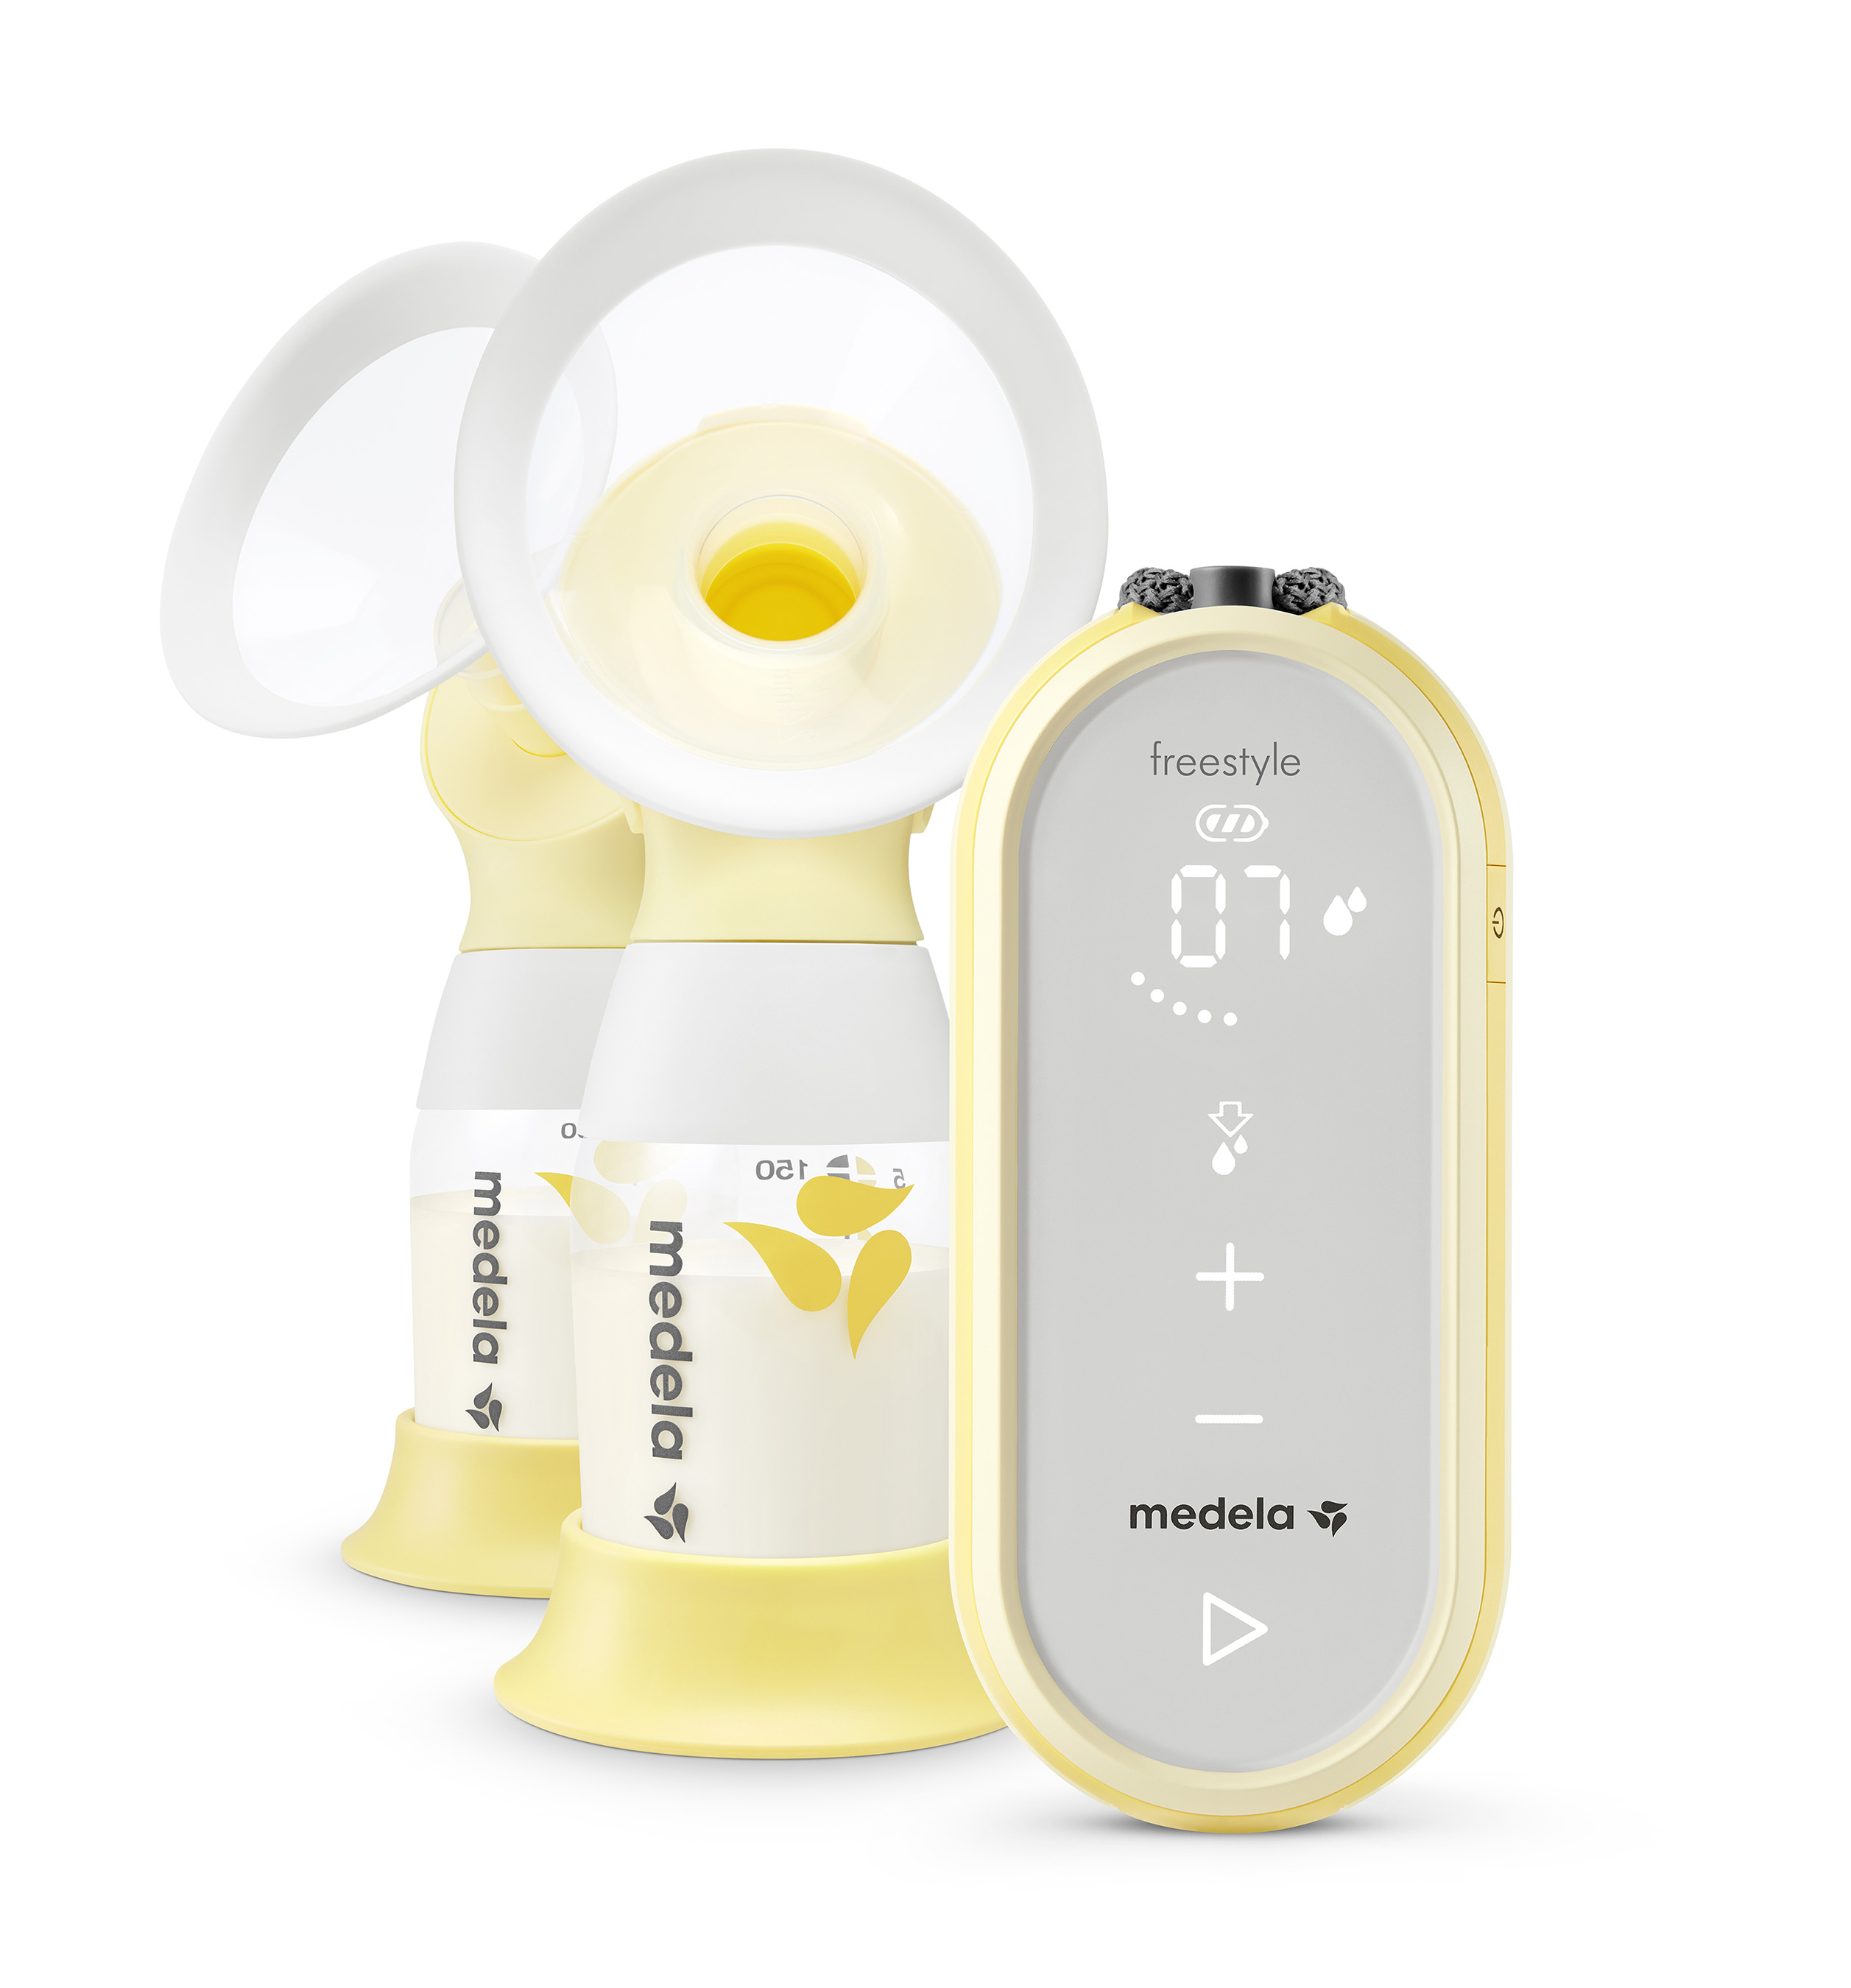 Medela's Freestyle Flextm is designed to fit into your life: the light, compact design and USB-chargeable battery give you flexibility to pump wherever and whenever, without compromising performance.